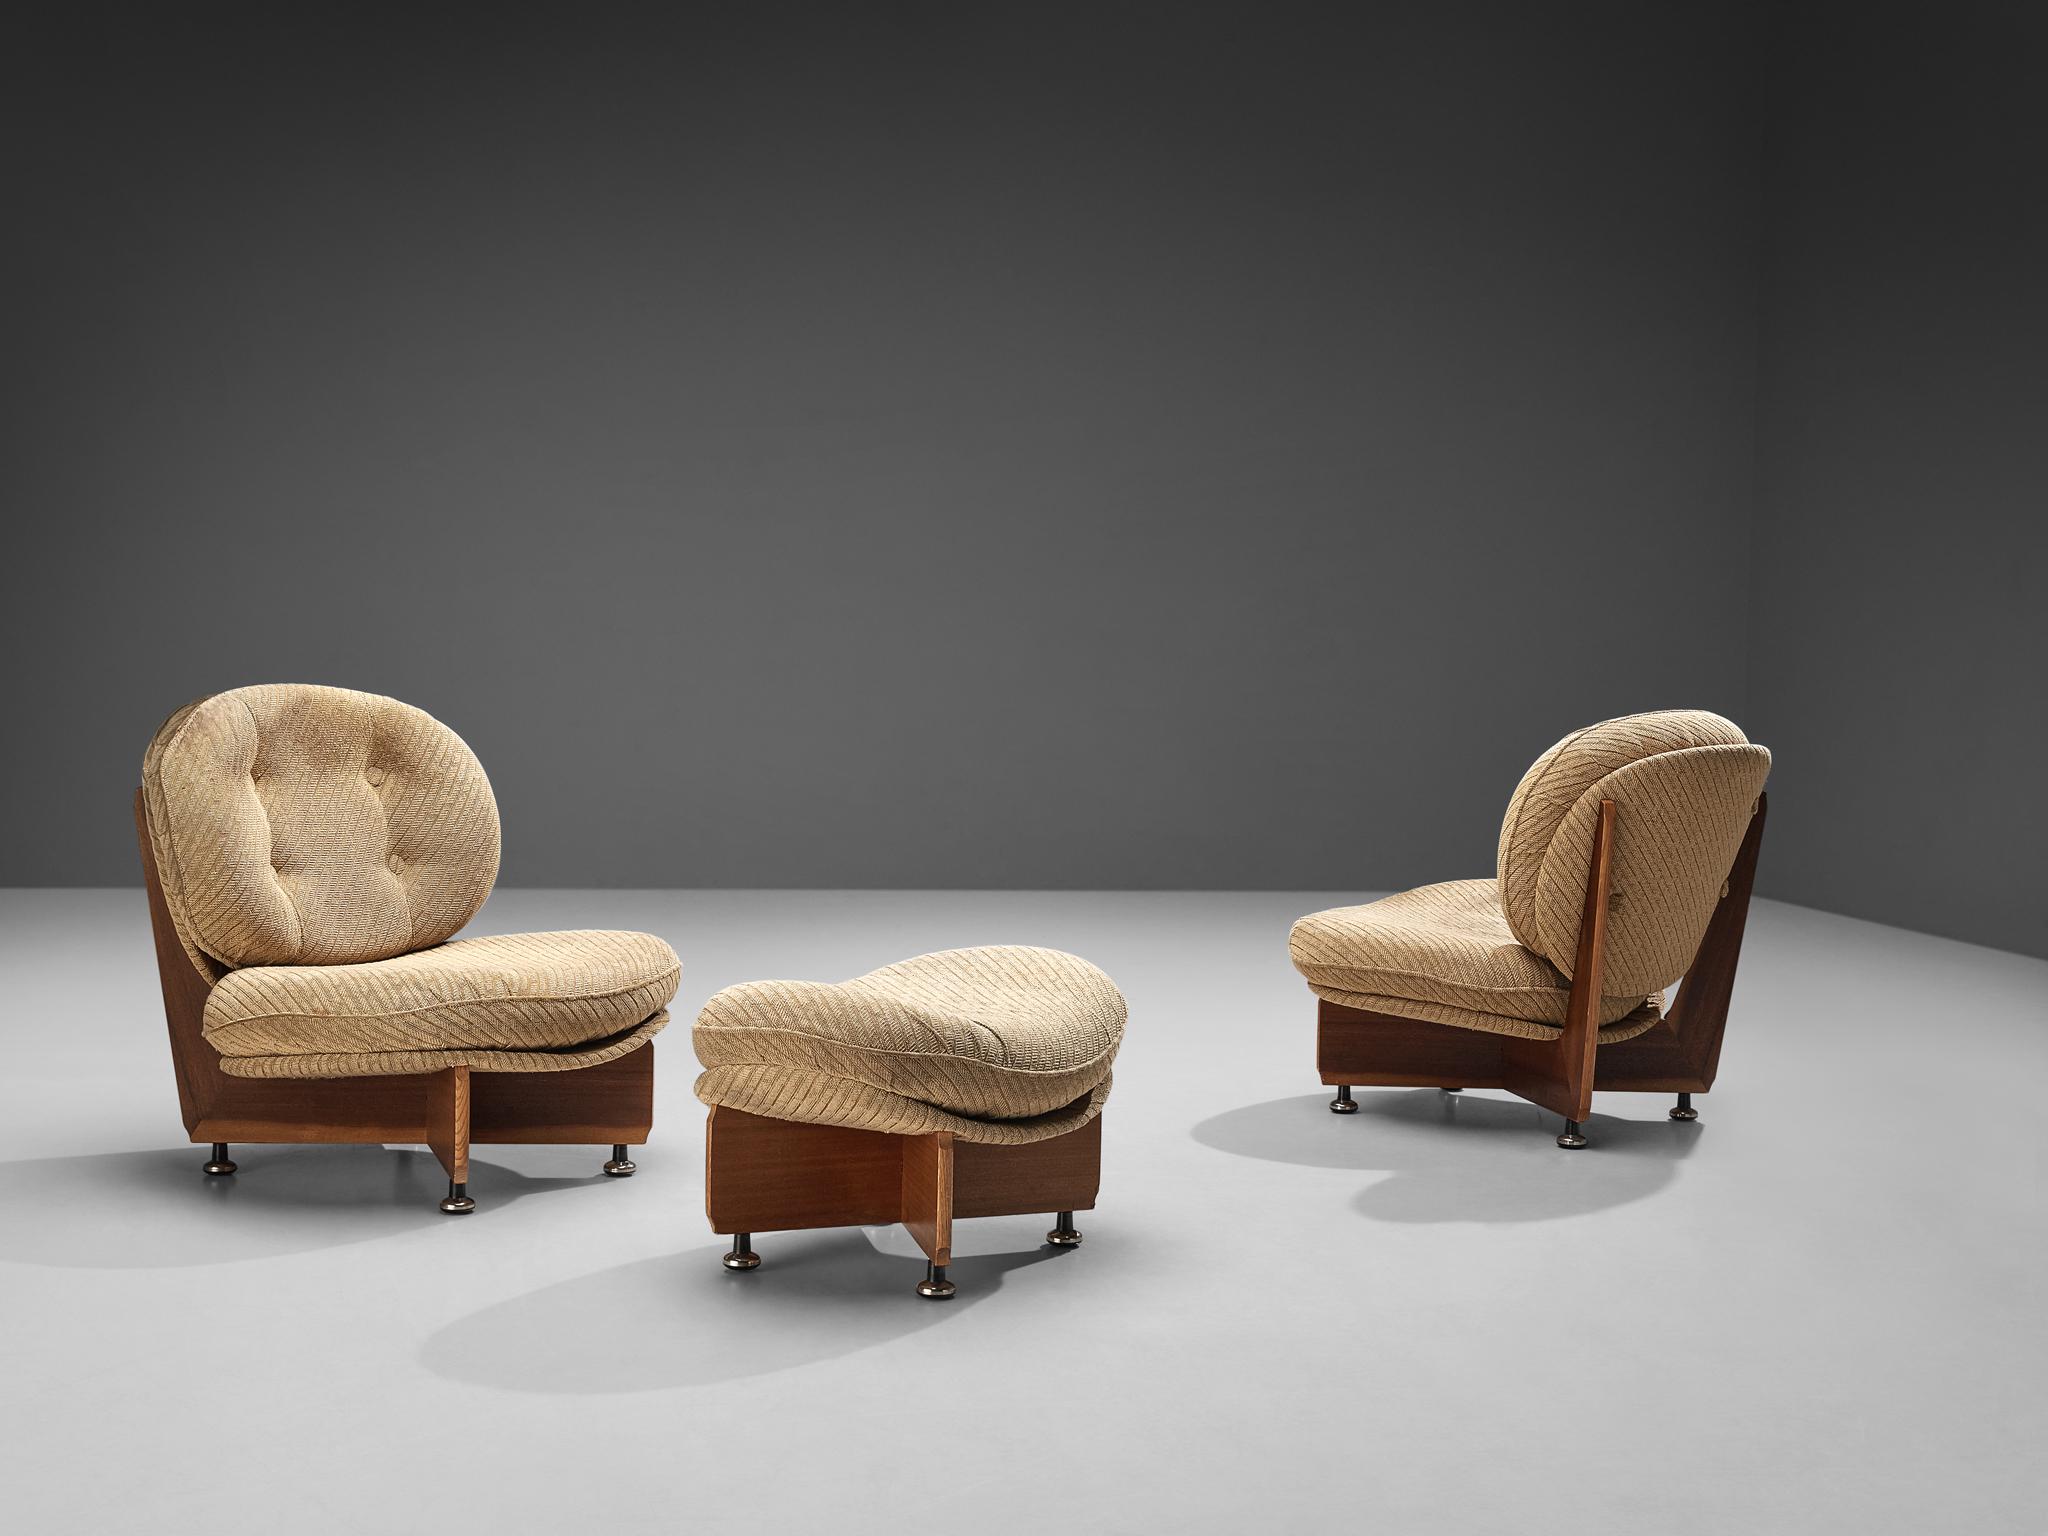 Pair of lounge chairs with ottoman, beige fabric, mahogany, Europe, 1970s.

These whimsical chairs are characterized by a unique construction. The seating area consists of curved shells that hold the voluminous, round cushions. The base convinces